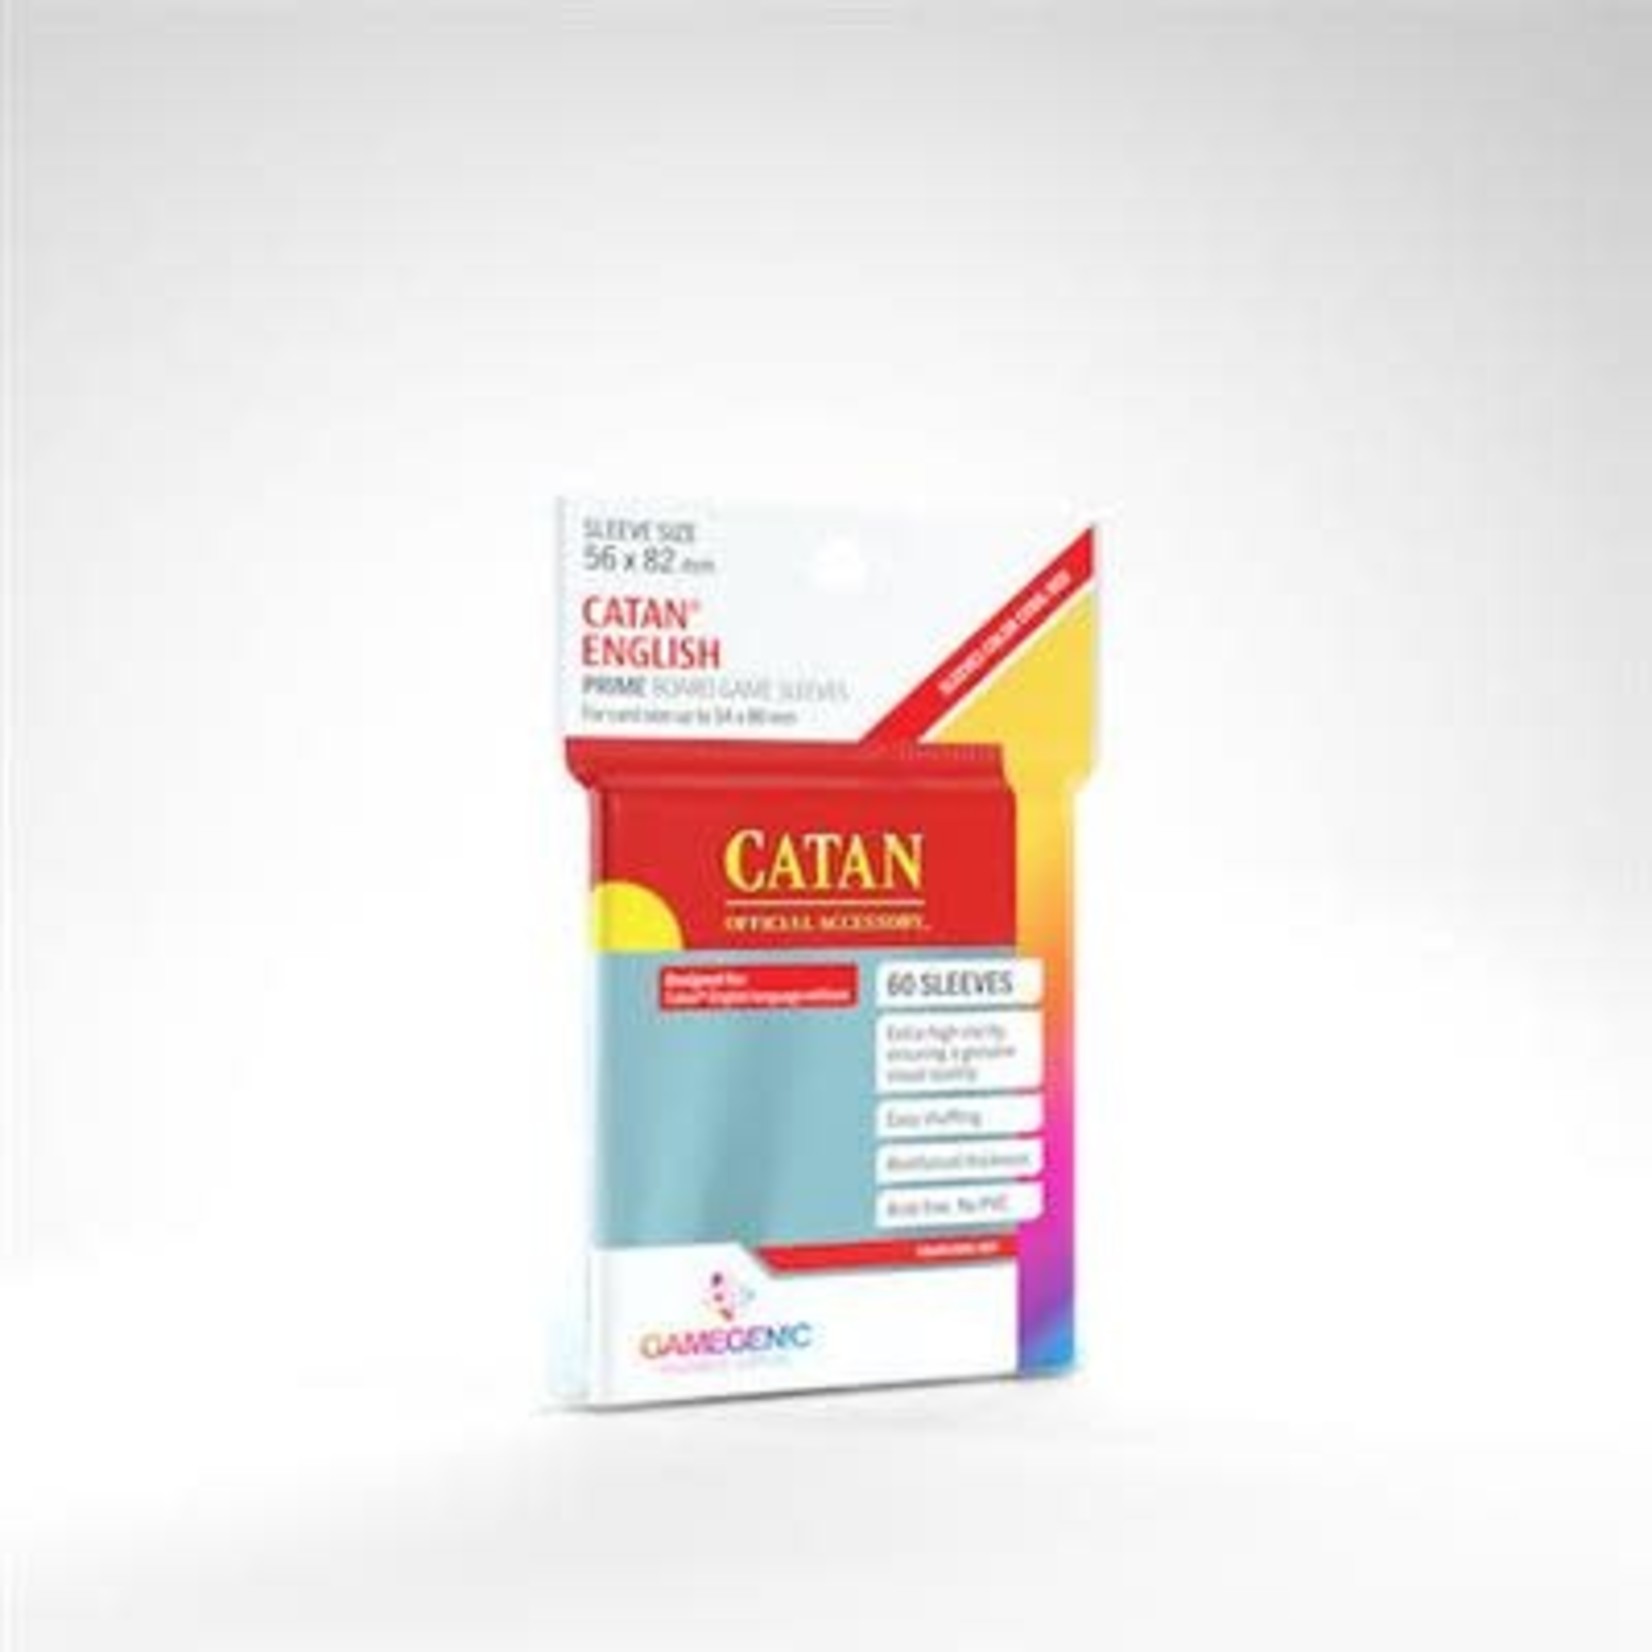 Gamegenic Prime Sleeves: Catan (56 x 82mm)